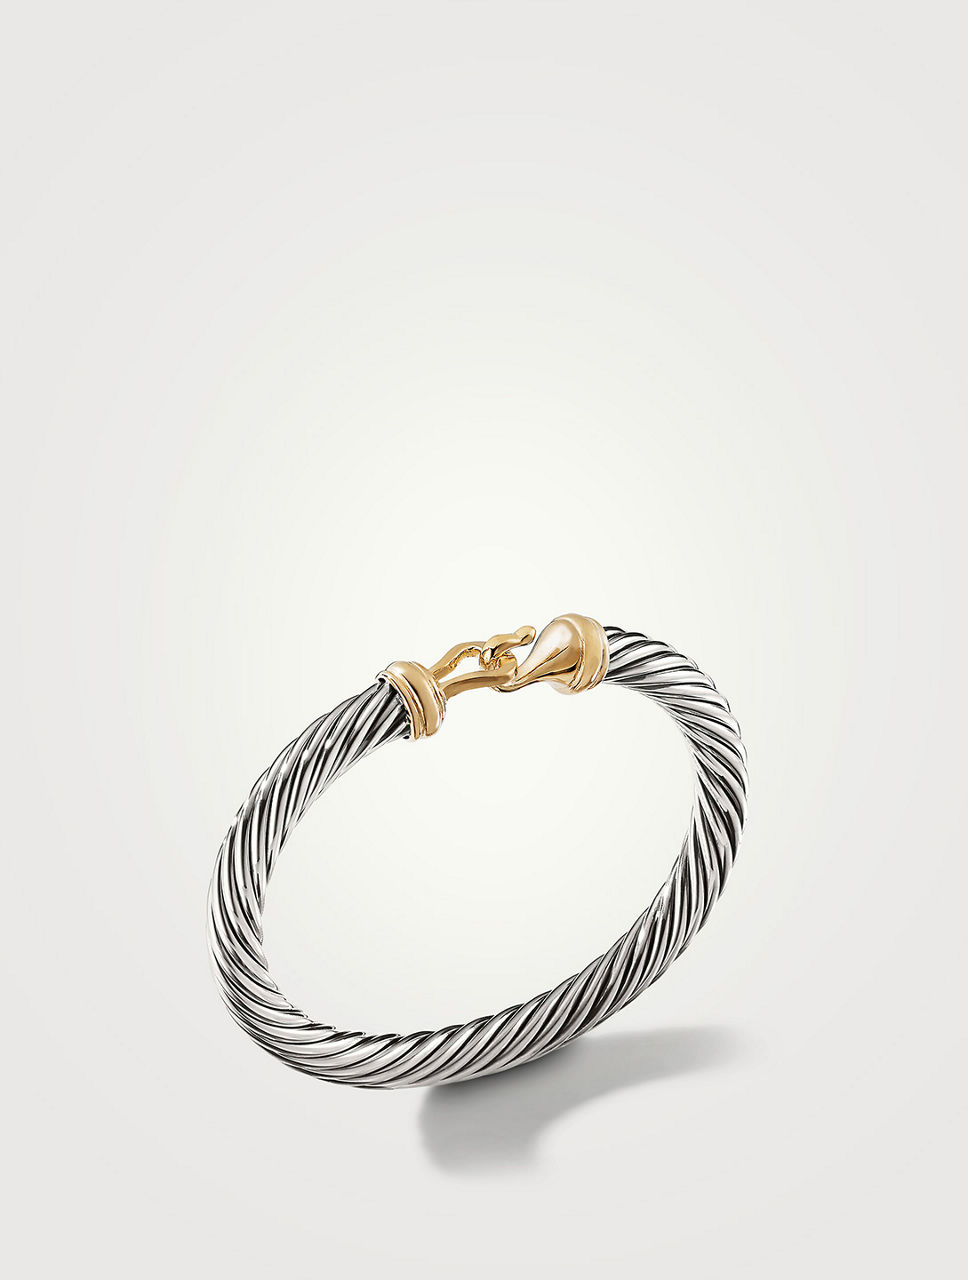 Buckle Bracelet Sterling Silver With 14k Yellow Gold